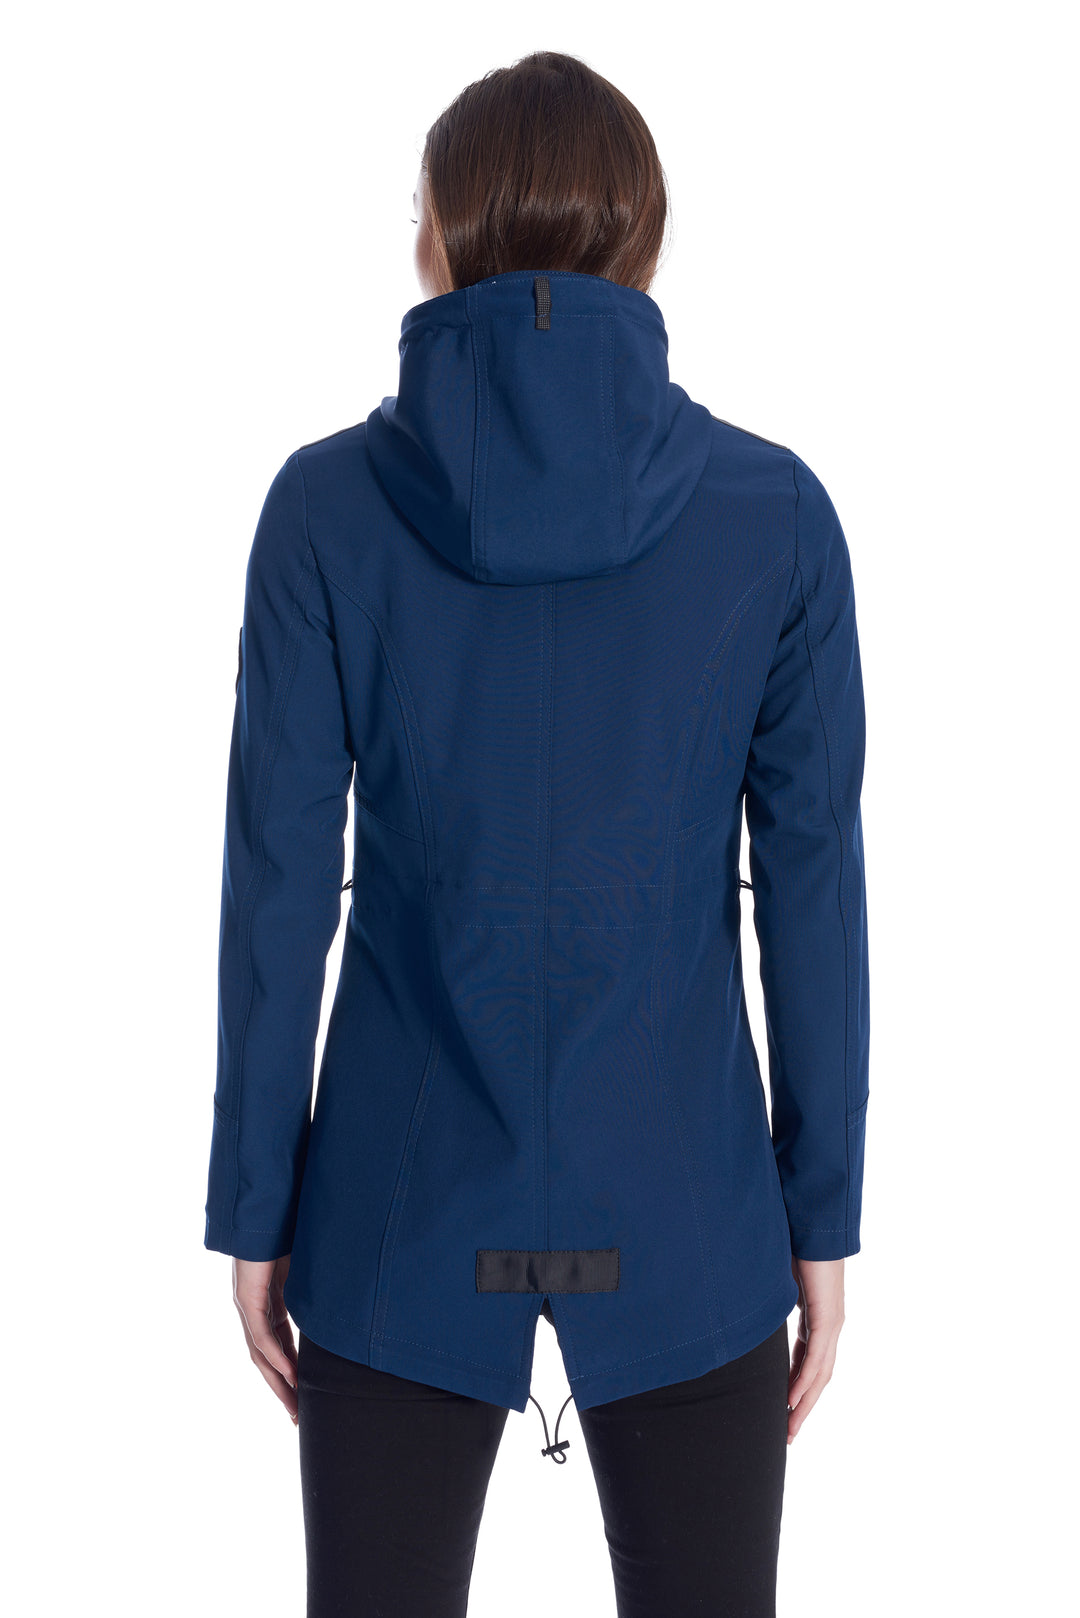 WOMEN'S NAVY LINED SOFTSHELL